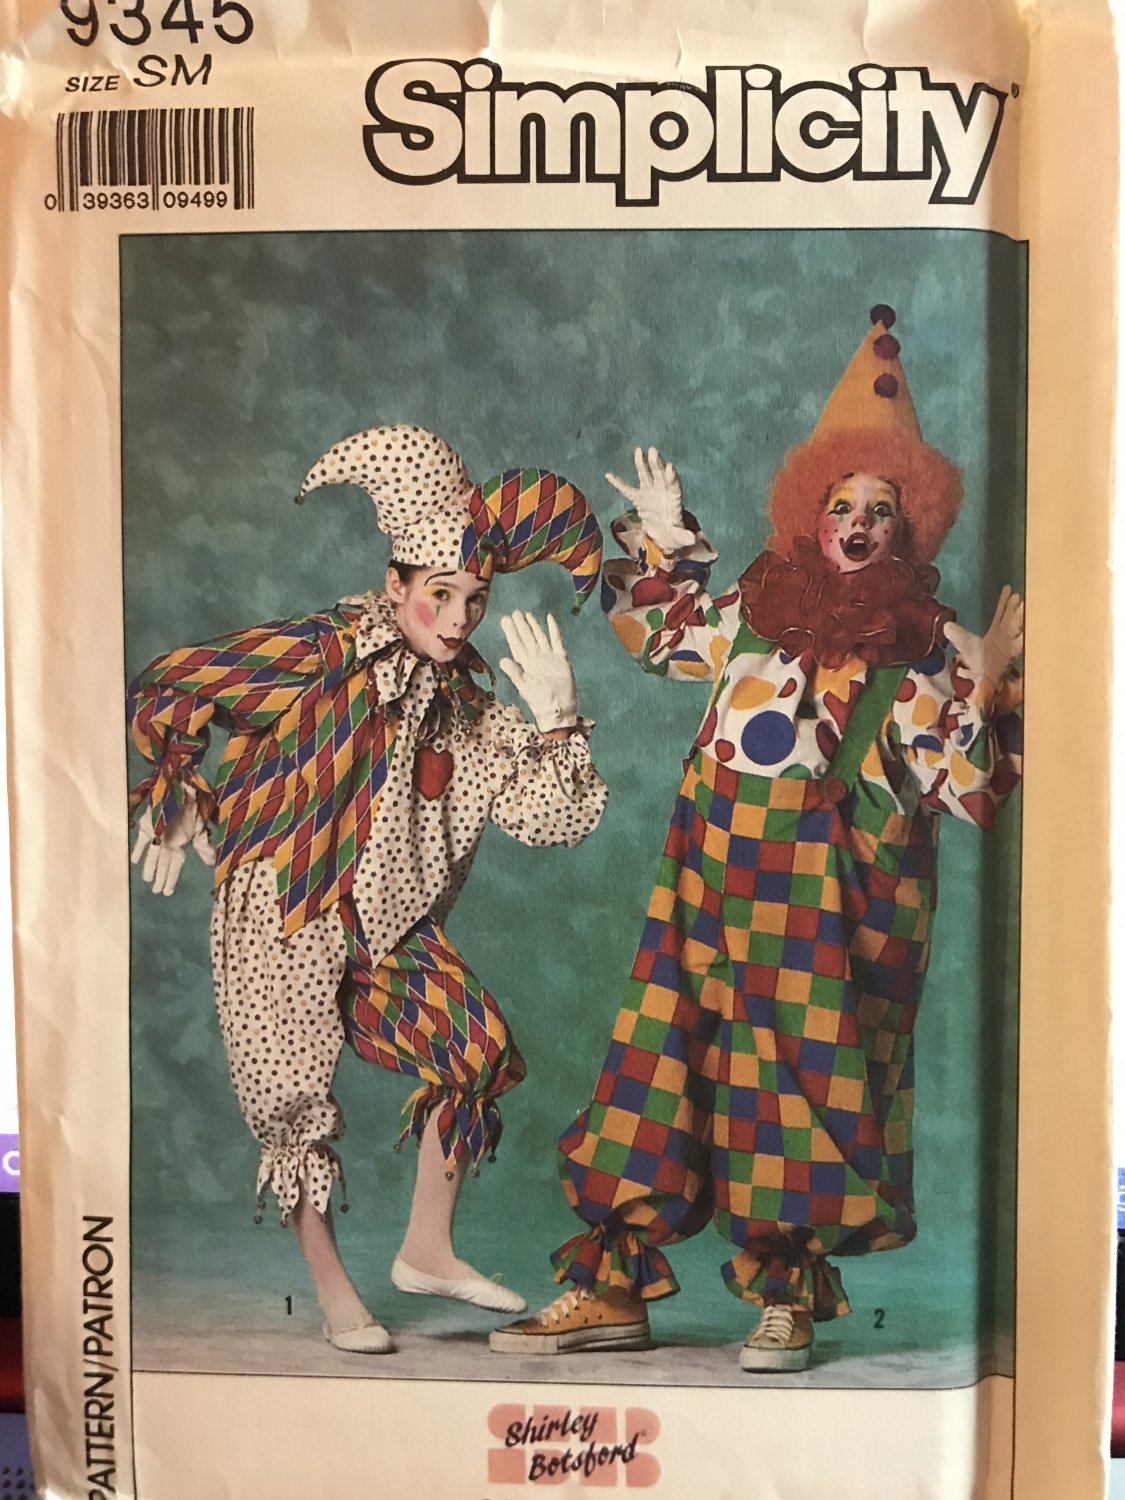 Simplicity 9345 Sewing Pattern for Clown Costumes & Hats for Children's Child's size Small 2-4